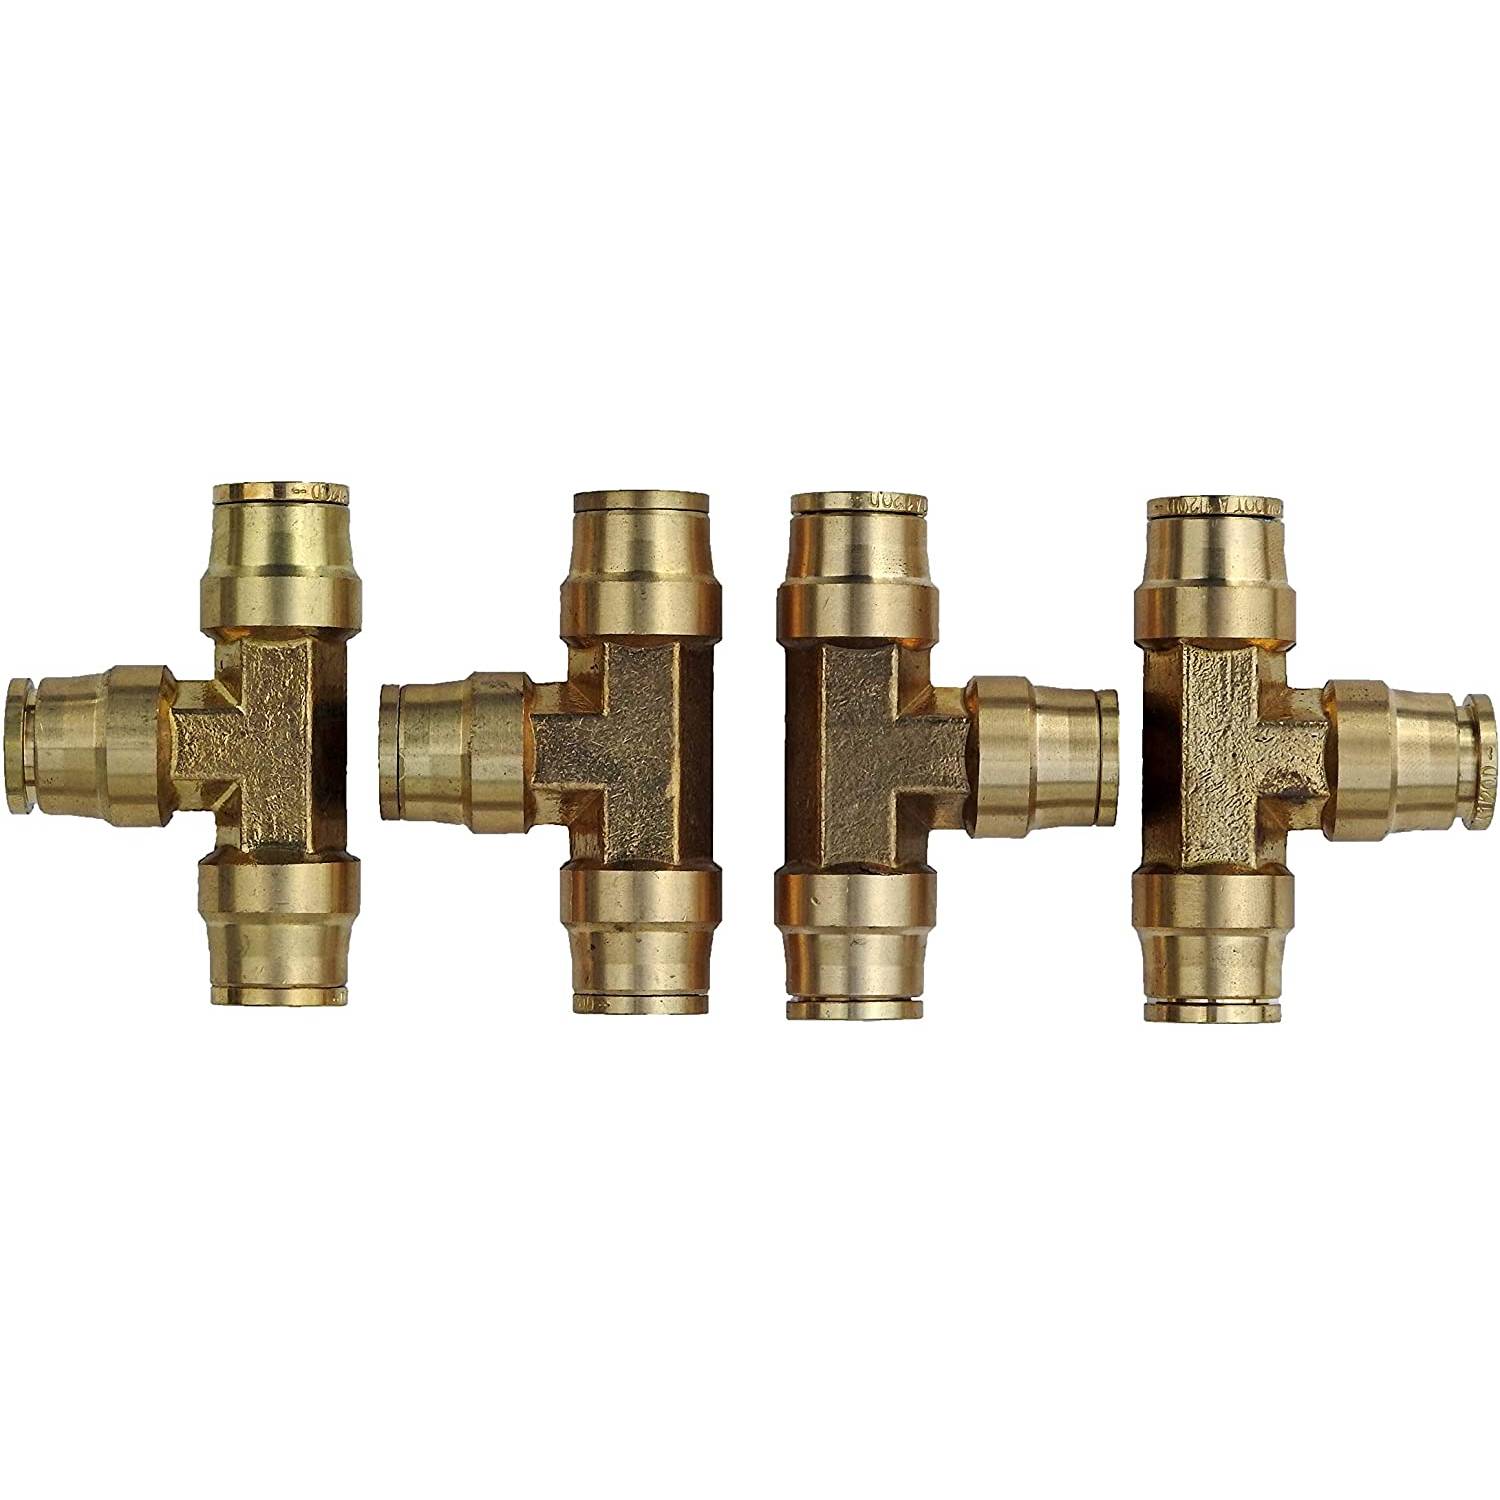 3/8” Brass Push Lock Union Tee, DOT Approved, 4 Pack